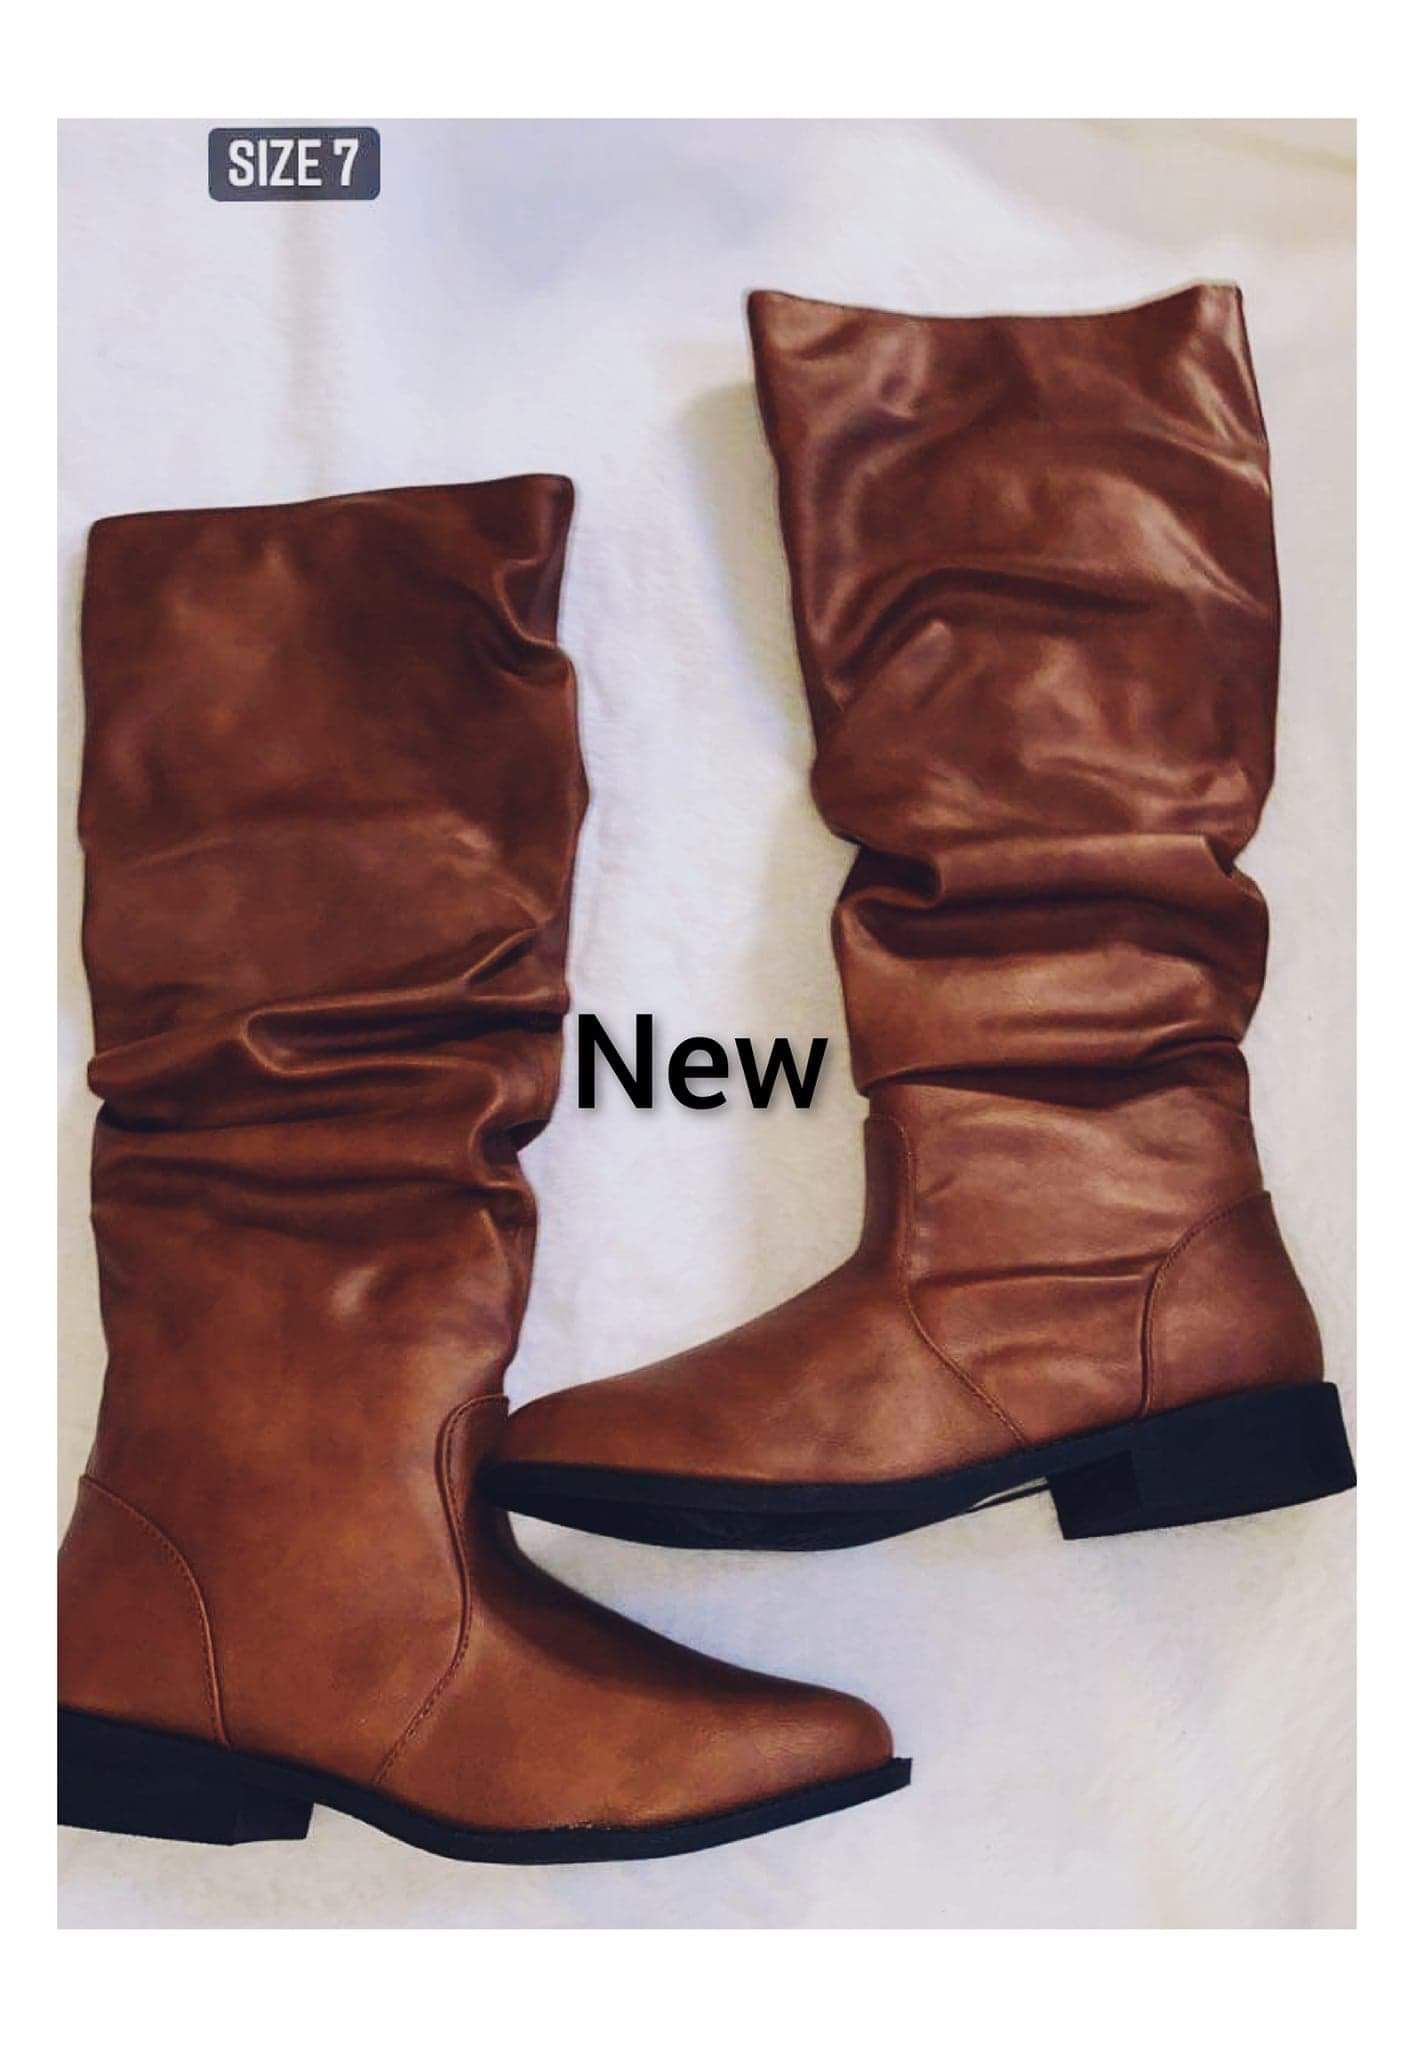 New Woman’s Boots Sz 7